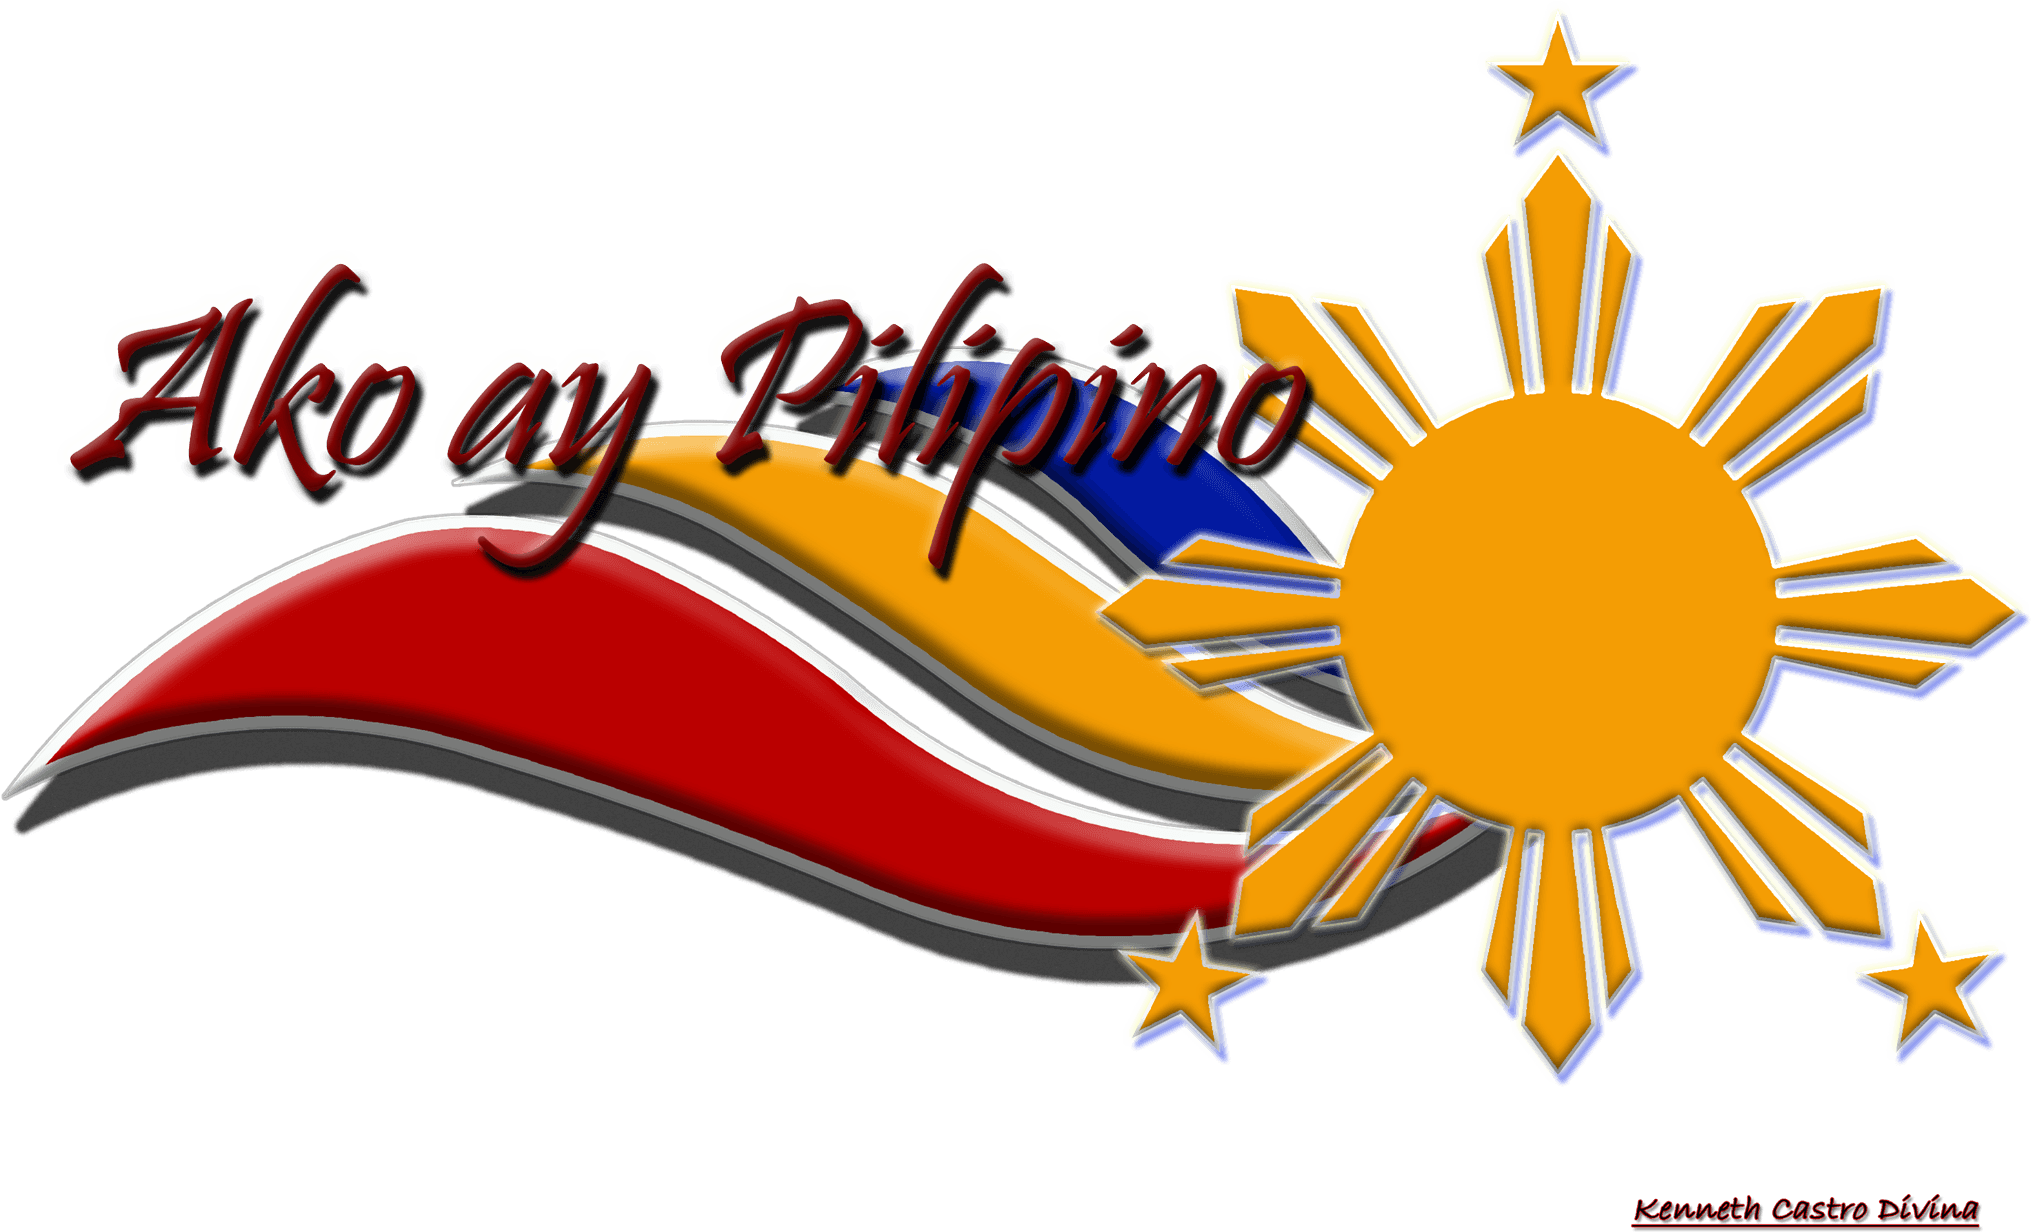 Pinoy Logo - Download While Surfing Looking For The Music On Youtube, I Saw ...